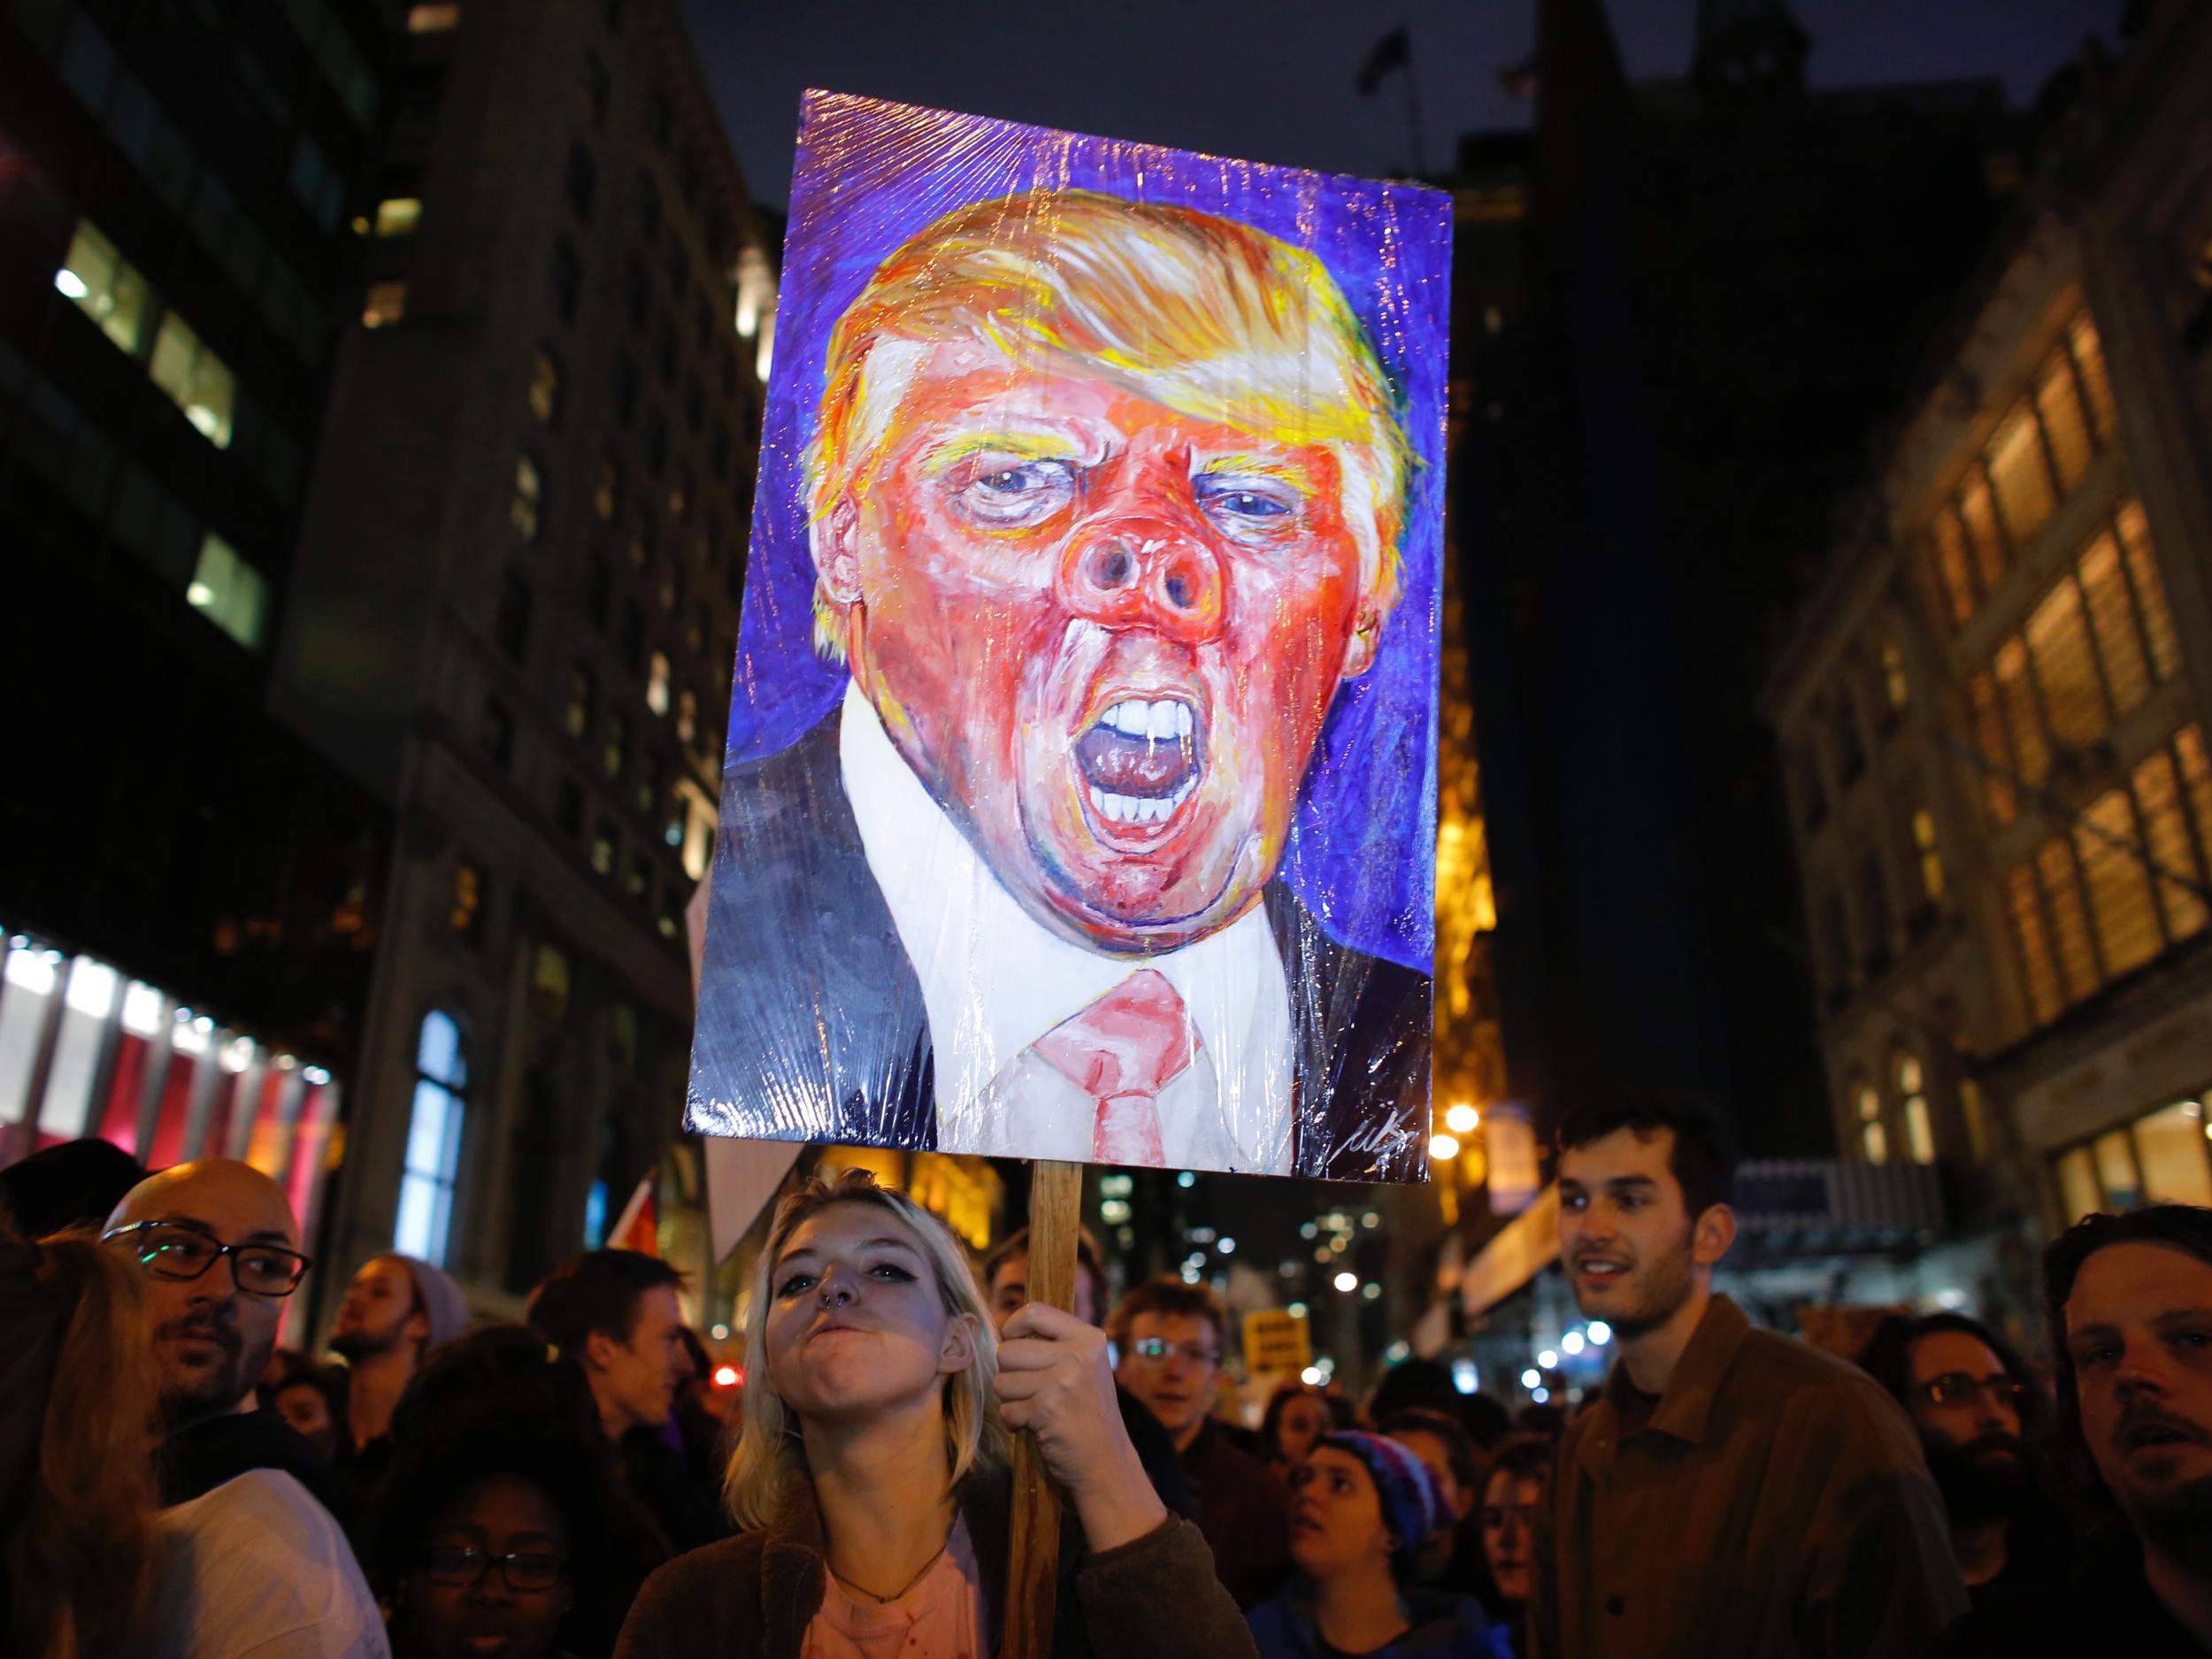 There have been protests against Donald Trump's election win, such as this one in New York